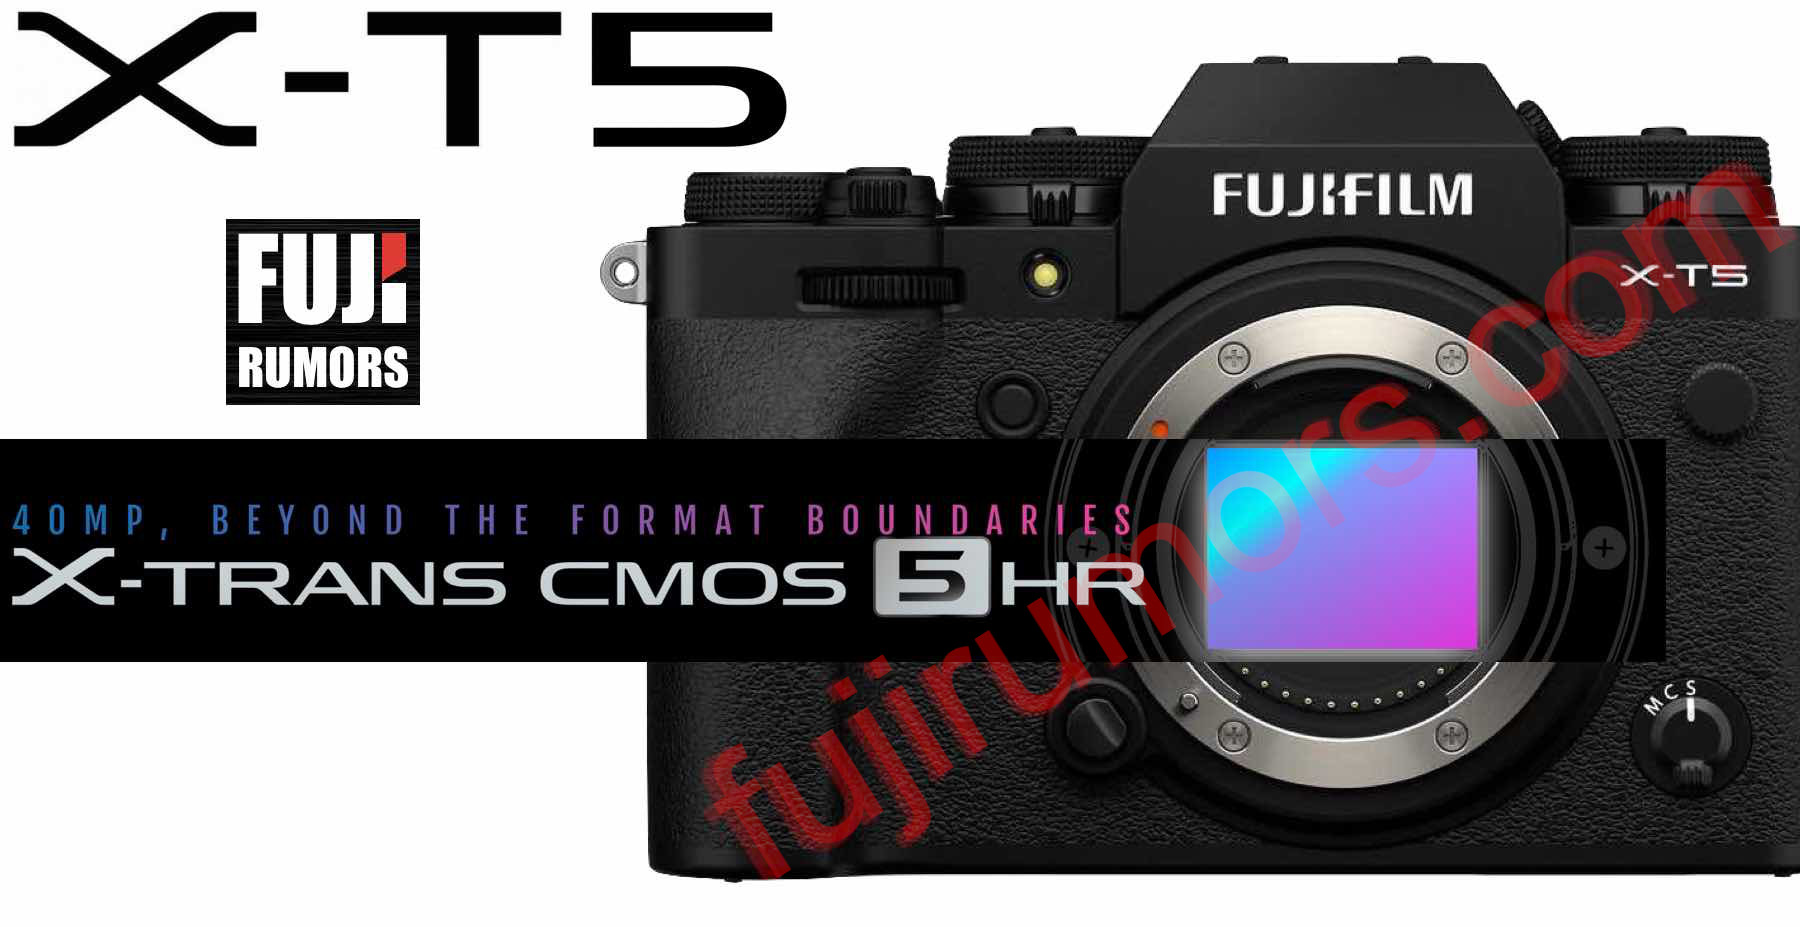 Fujifilm X-T5 to Feature 40MP Non-Stacked Sensor (No 26MP Stacked 